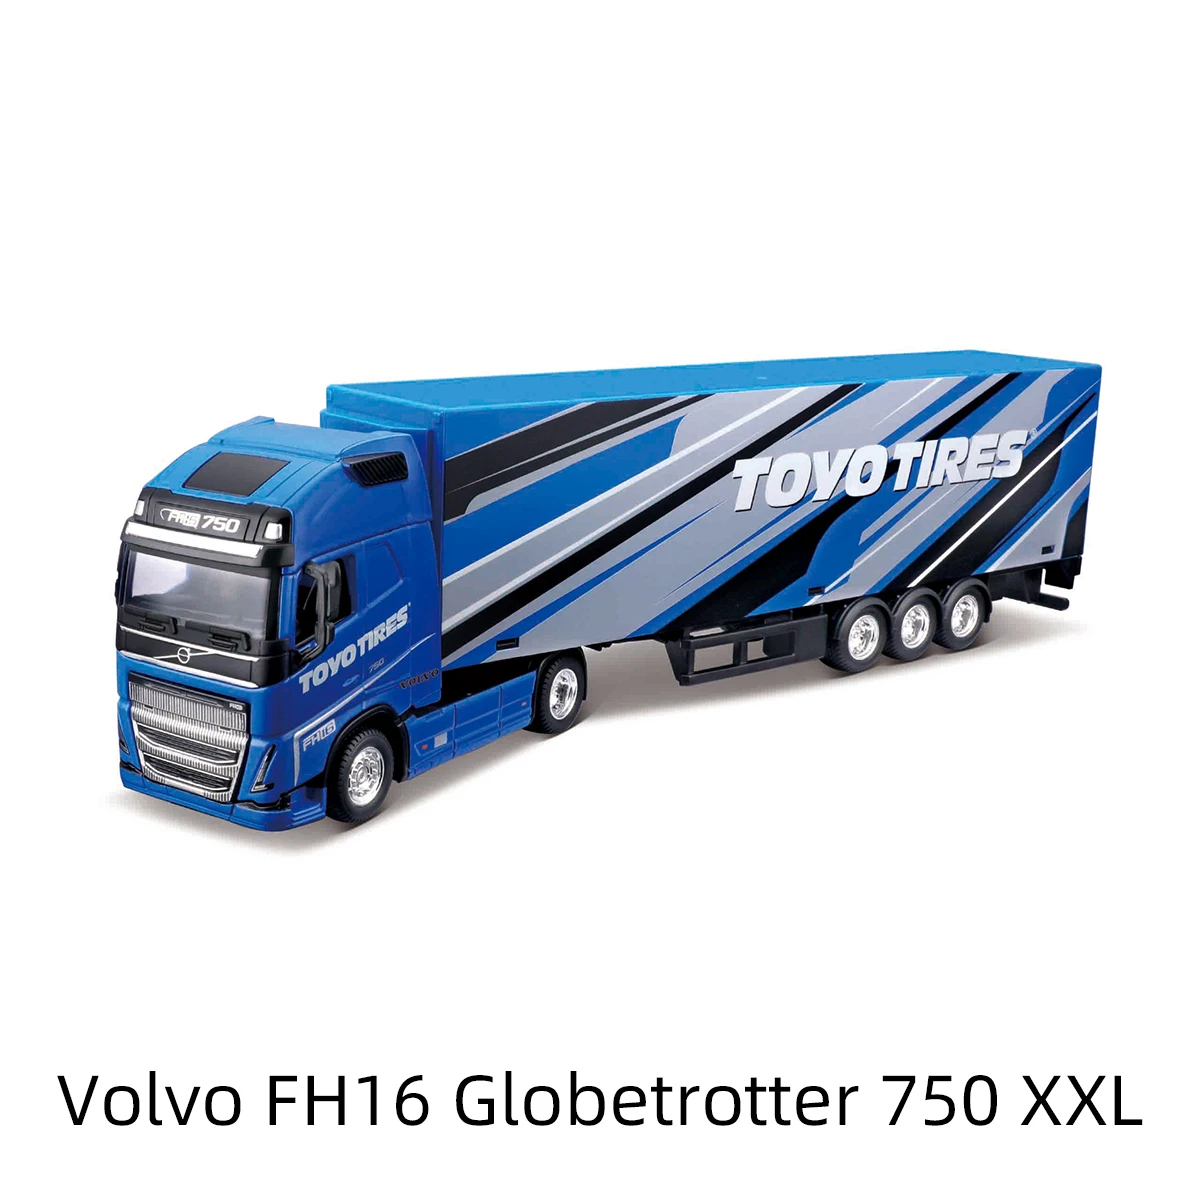 Bburago 1:43 Volvo FH16 Globetrotter 750 XX Trailer Heavy Tractor Truck Blue Die Cast Collectible Hobbies Motorcycle Model Toys